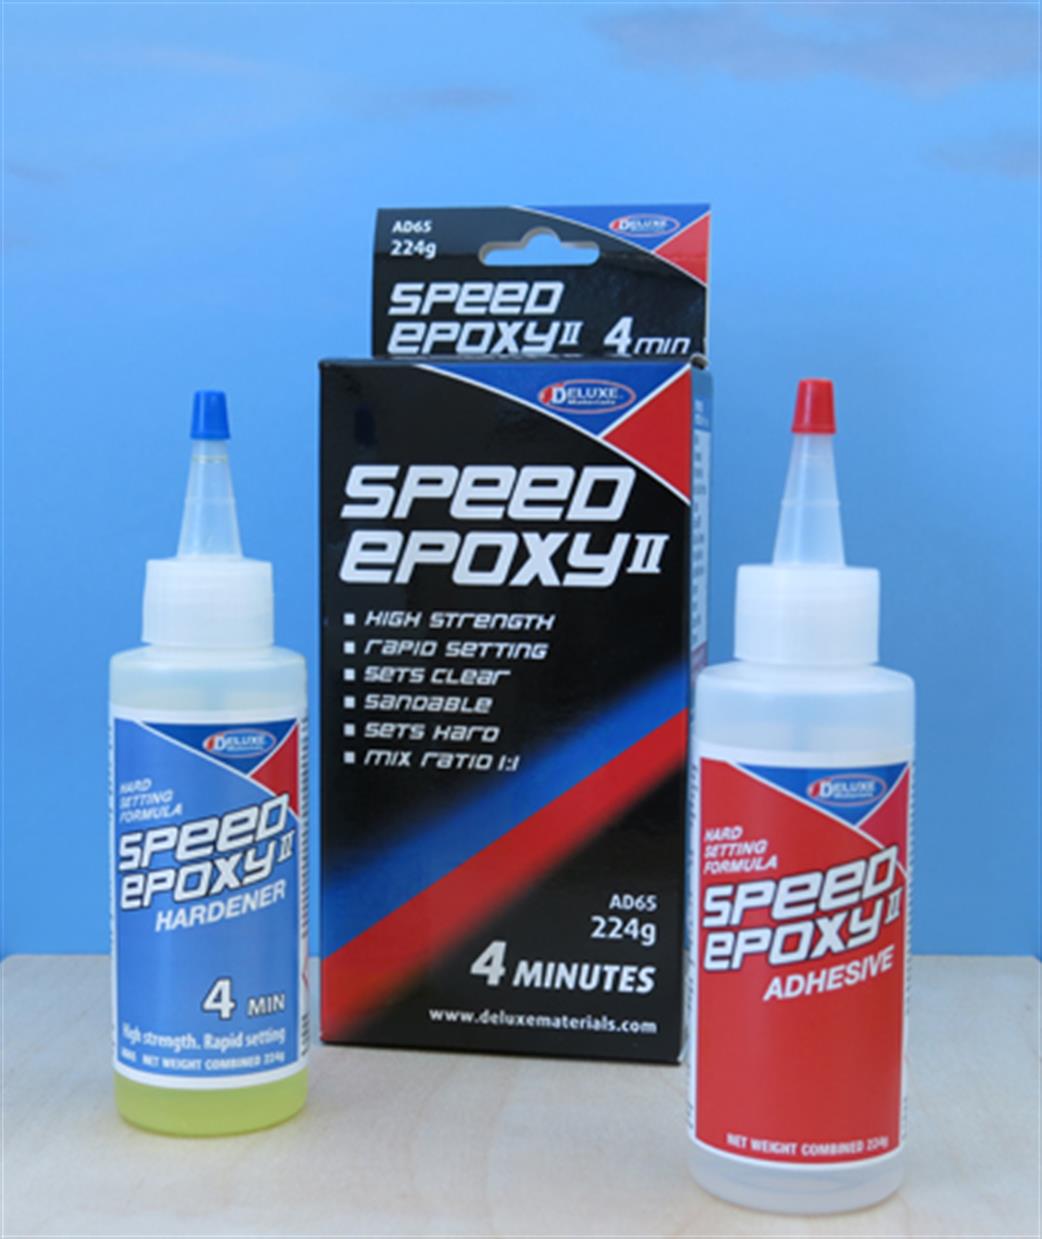 Deluxe Materials AD65 4 Minutes Speed Epoxy 224g